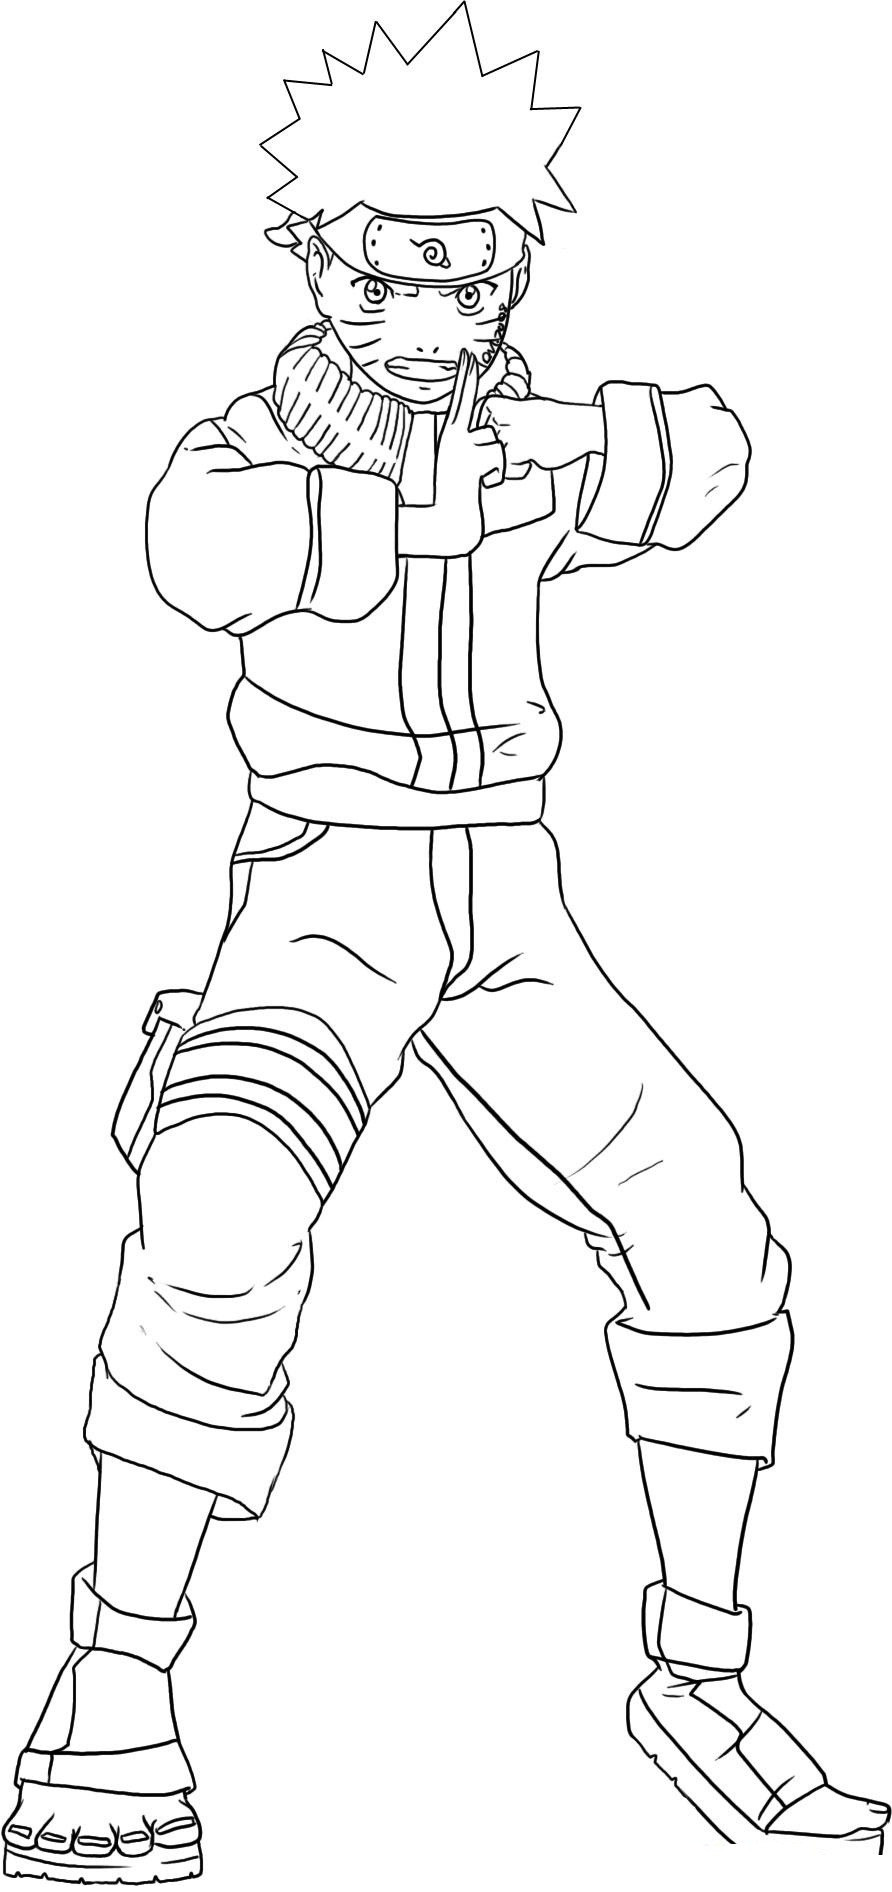 Printable Coloring Pages For Toddlers Free
 Free Printable Naruto Coloring Pages For Kids